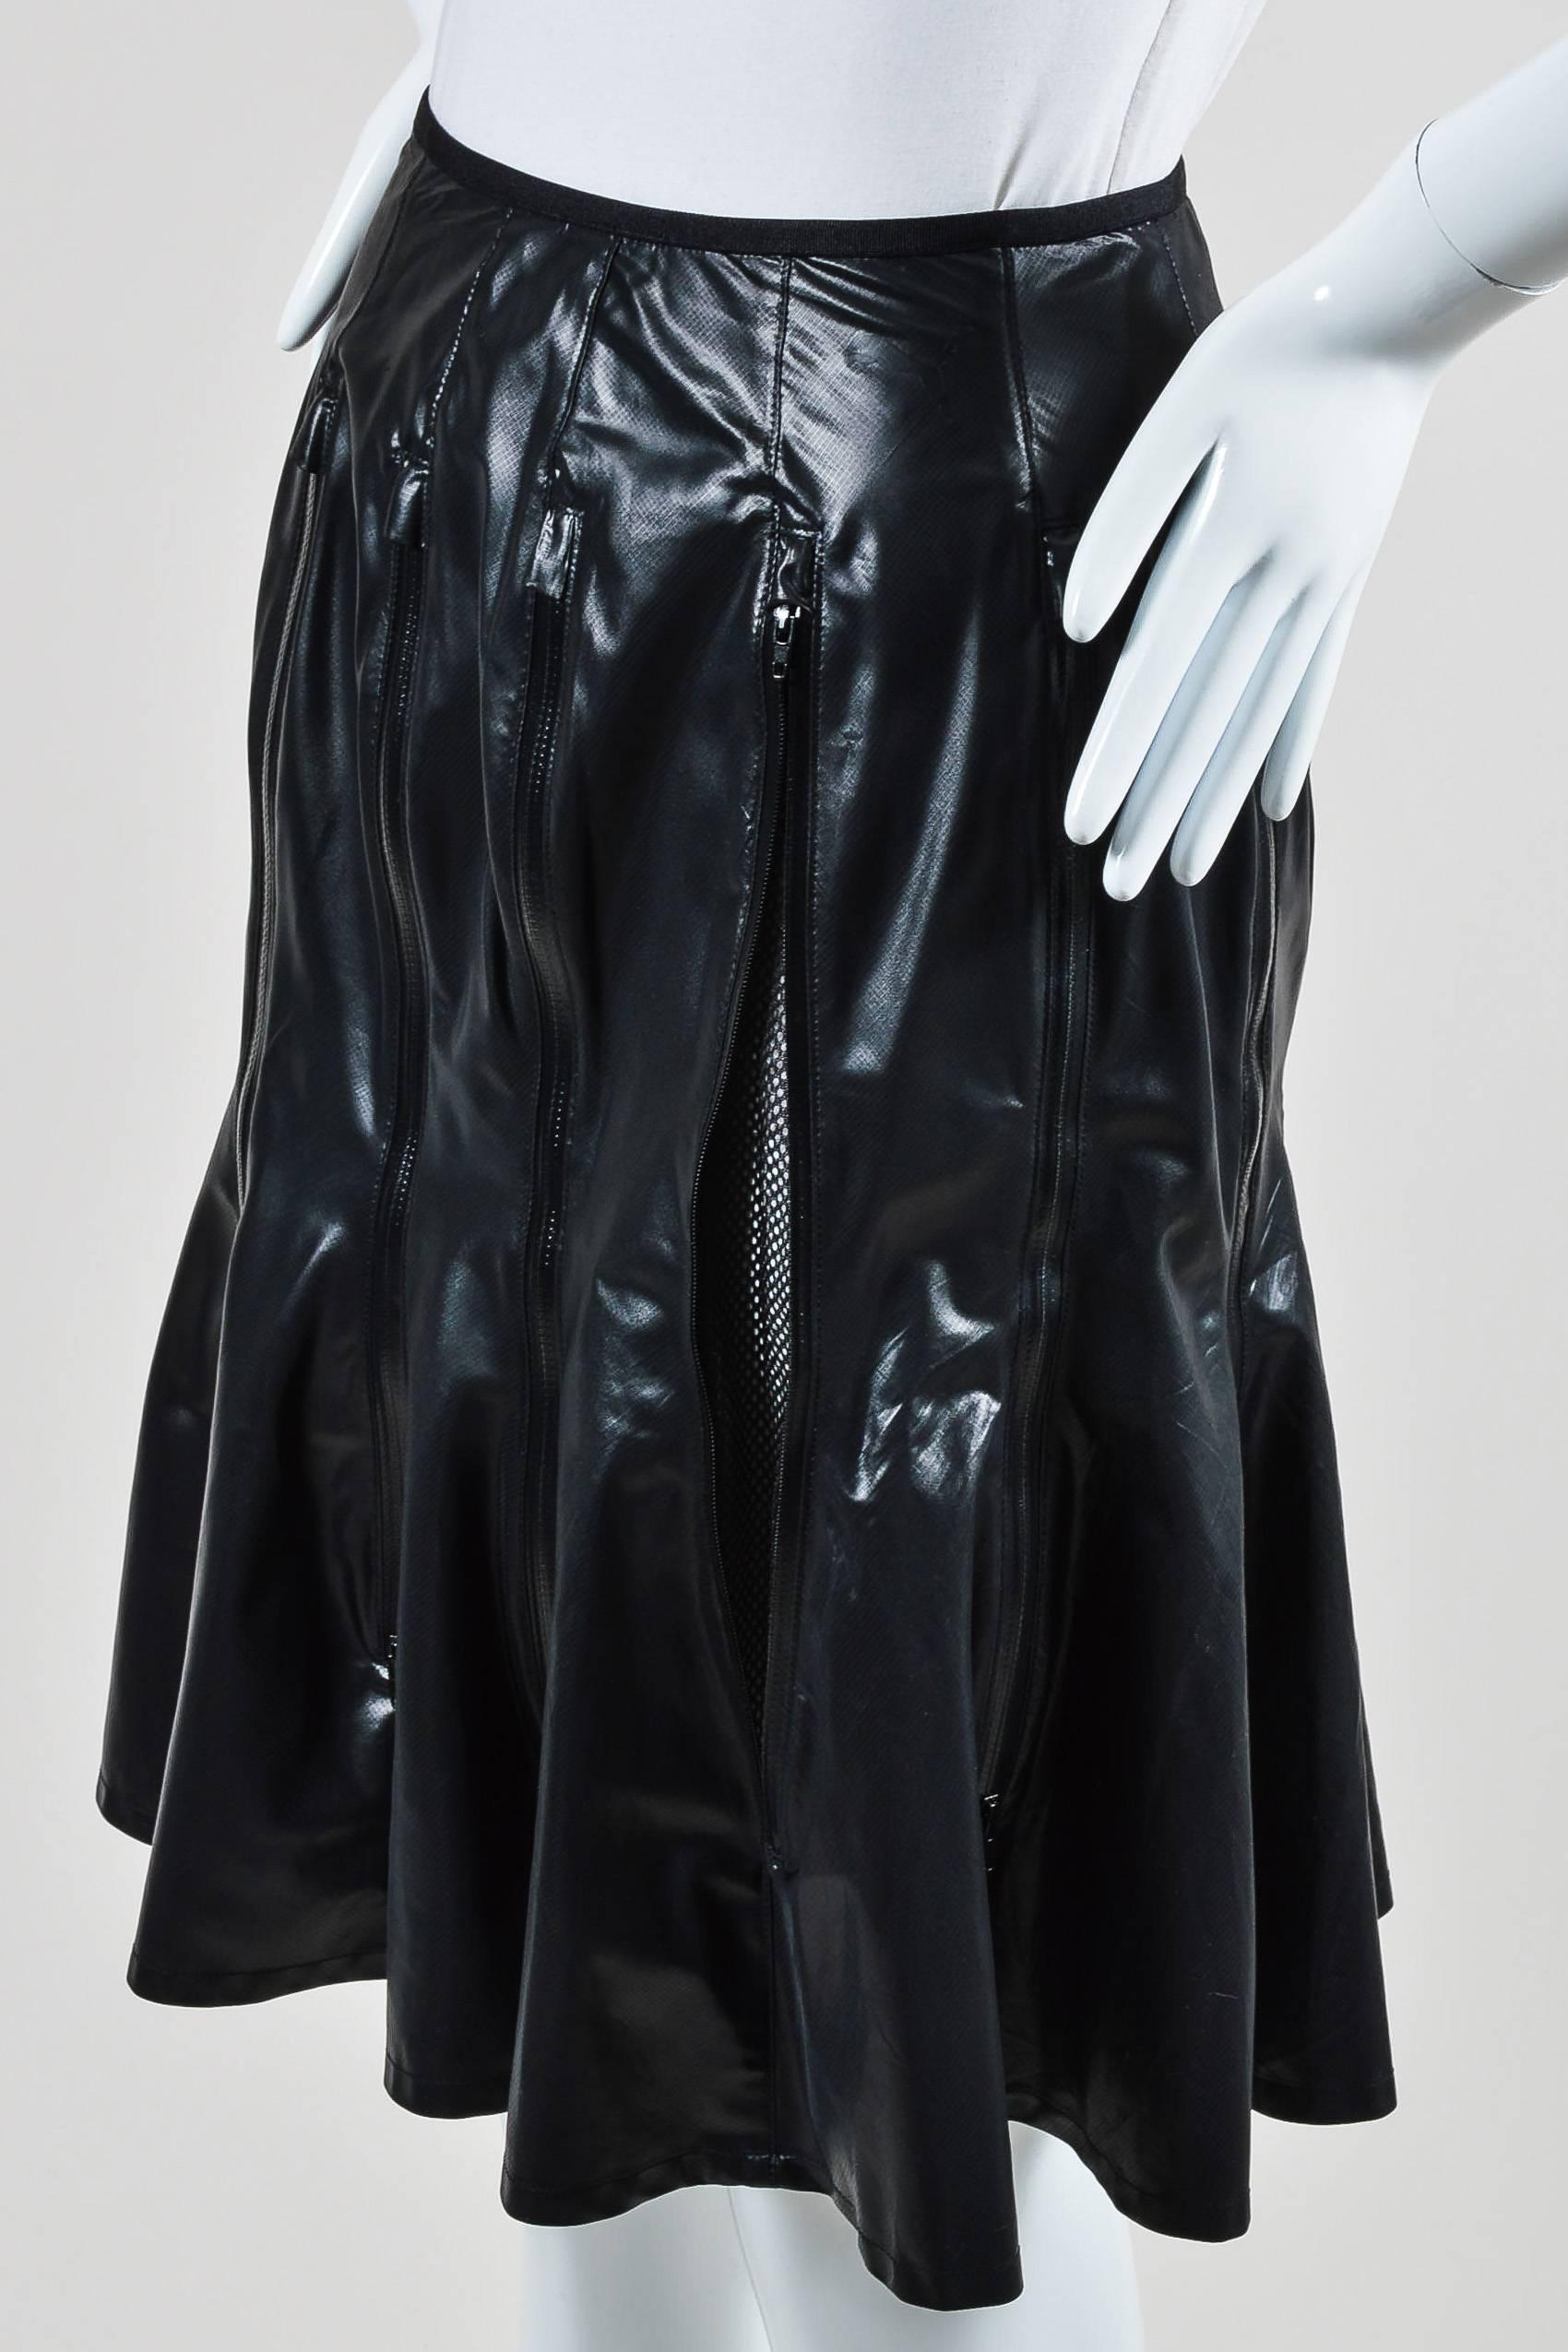 Knee length flare skirt. This avant-garde skirt features vertical zipper details with inner mesh paneling, glossy fabric, and flare at hem. Hook-and-eye and hidden zipper closure in back.